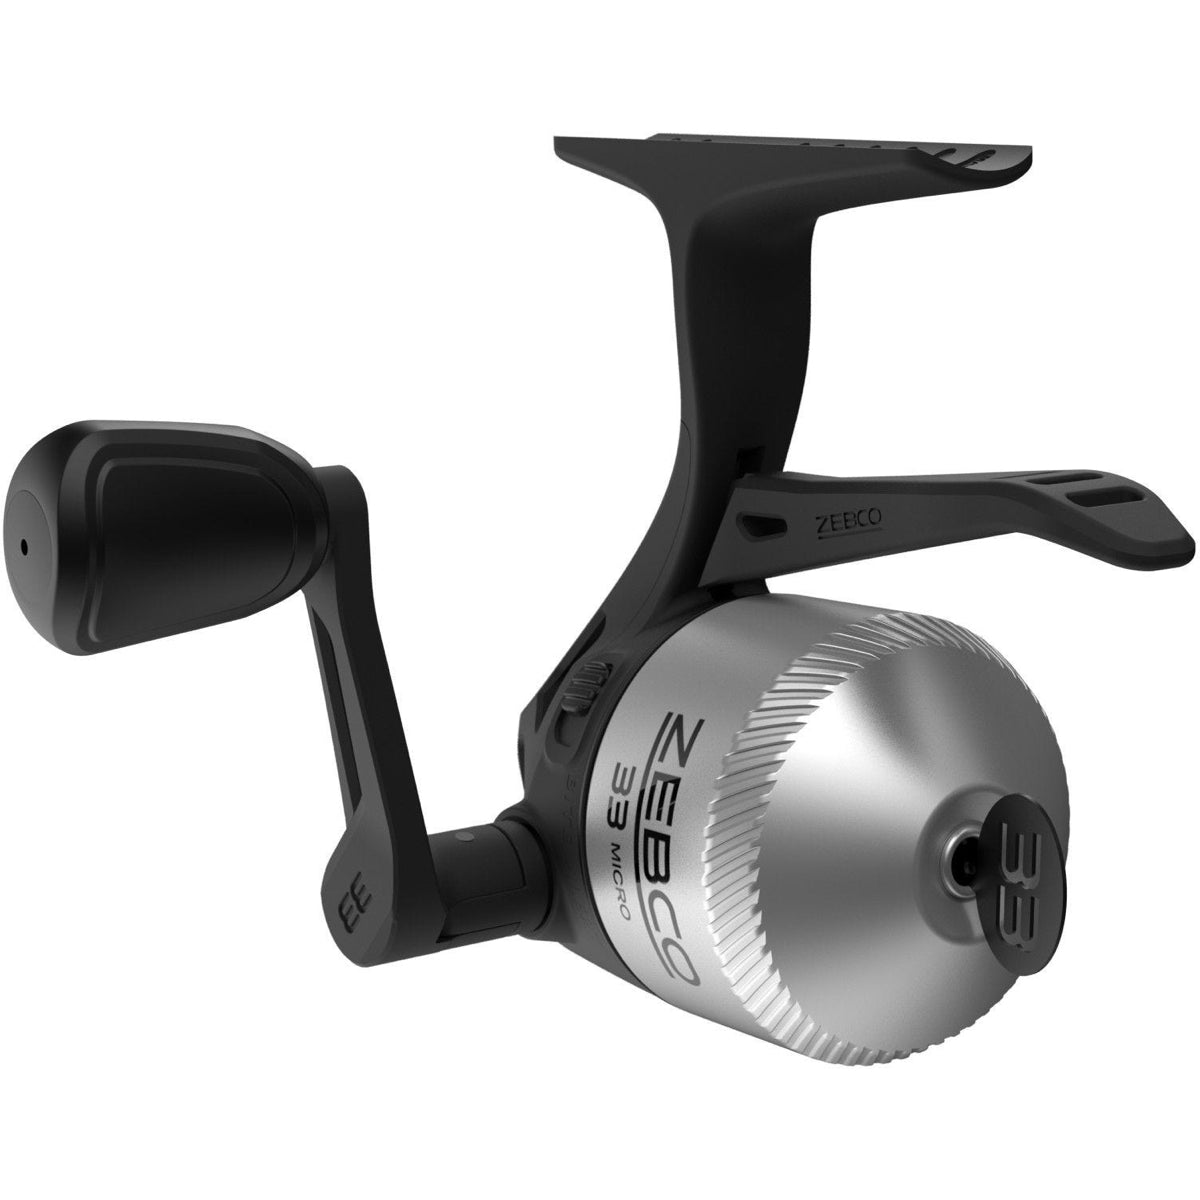 Photo of Zebco Micro Triggerspin Reel for sale at United Tackle Shops.